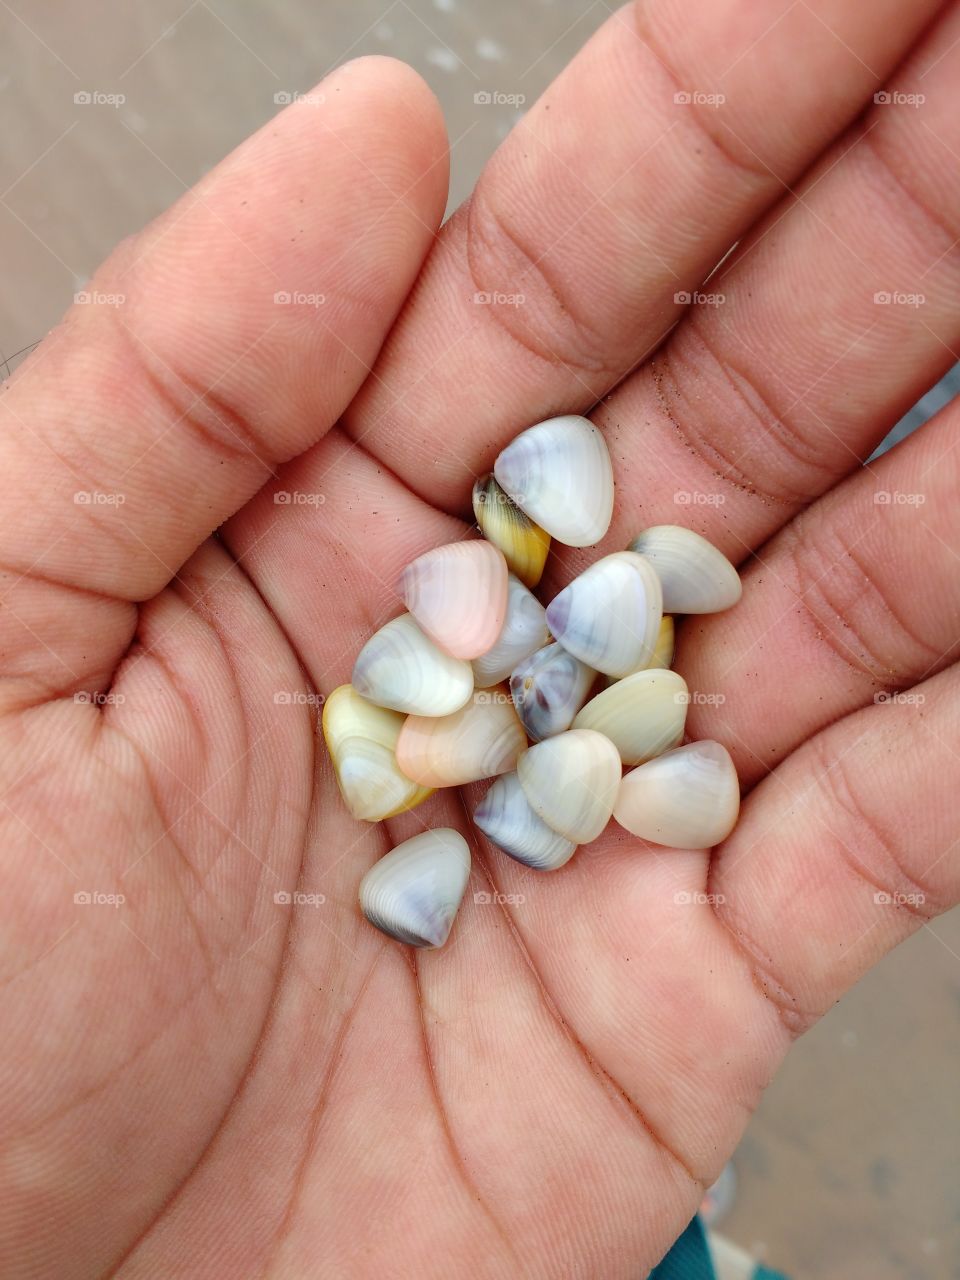 Sea  shell in my hand